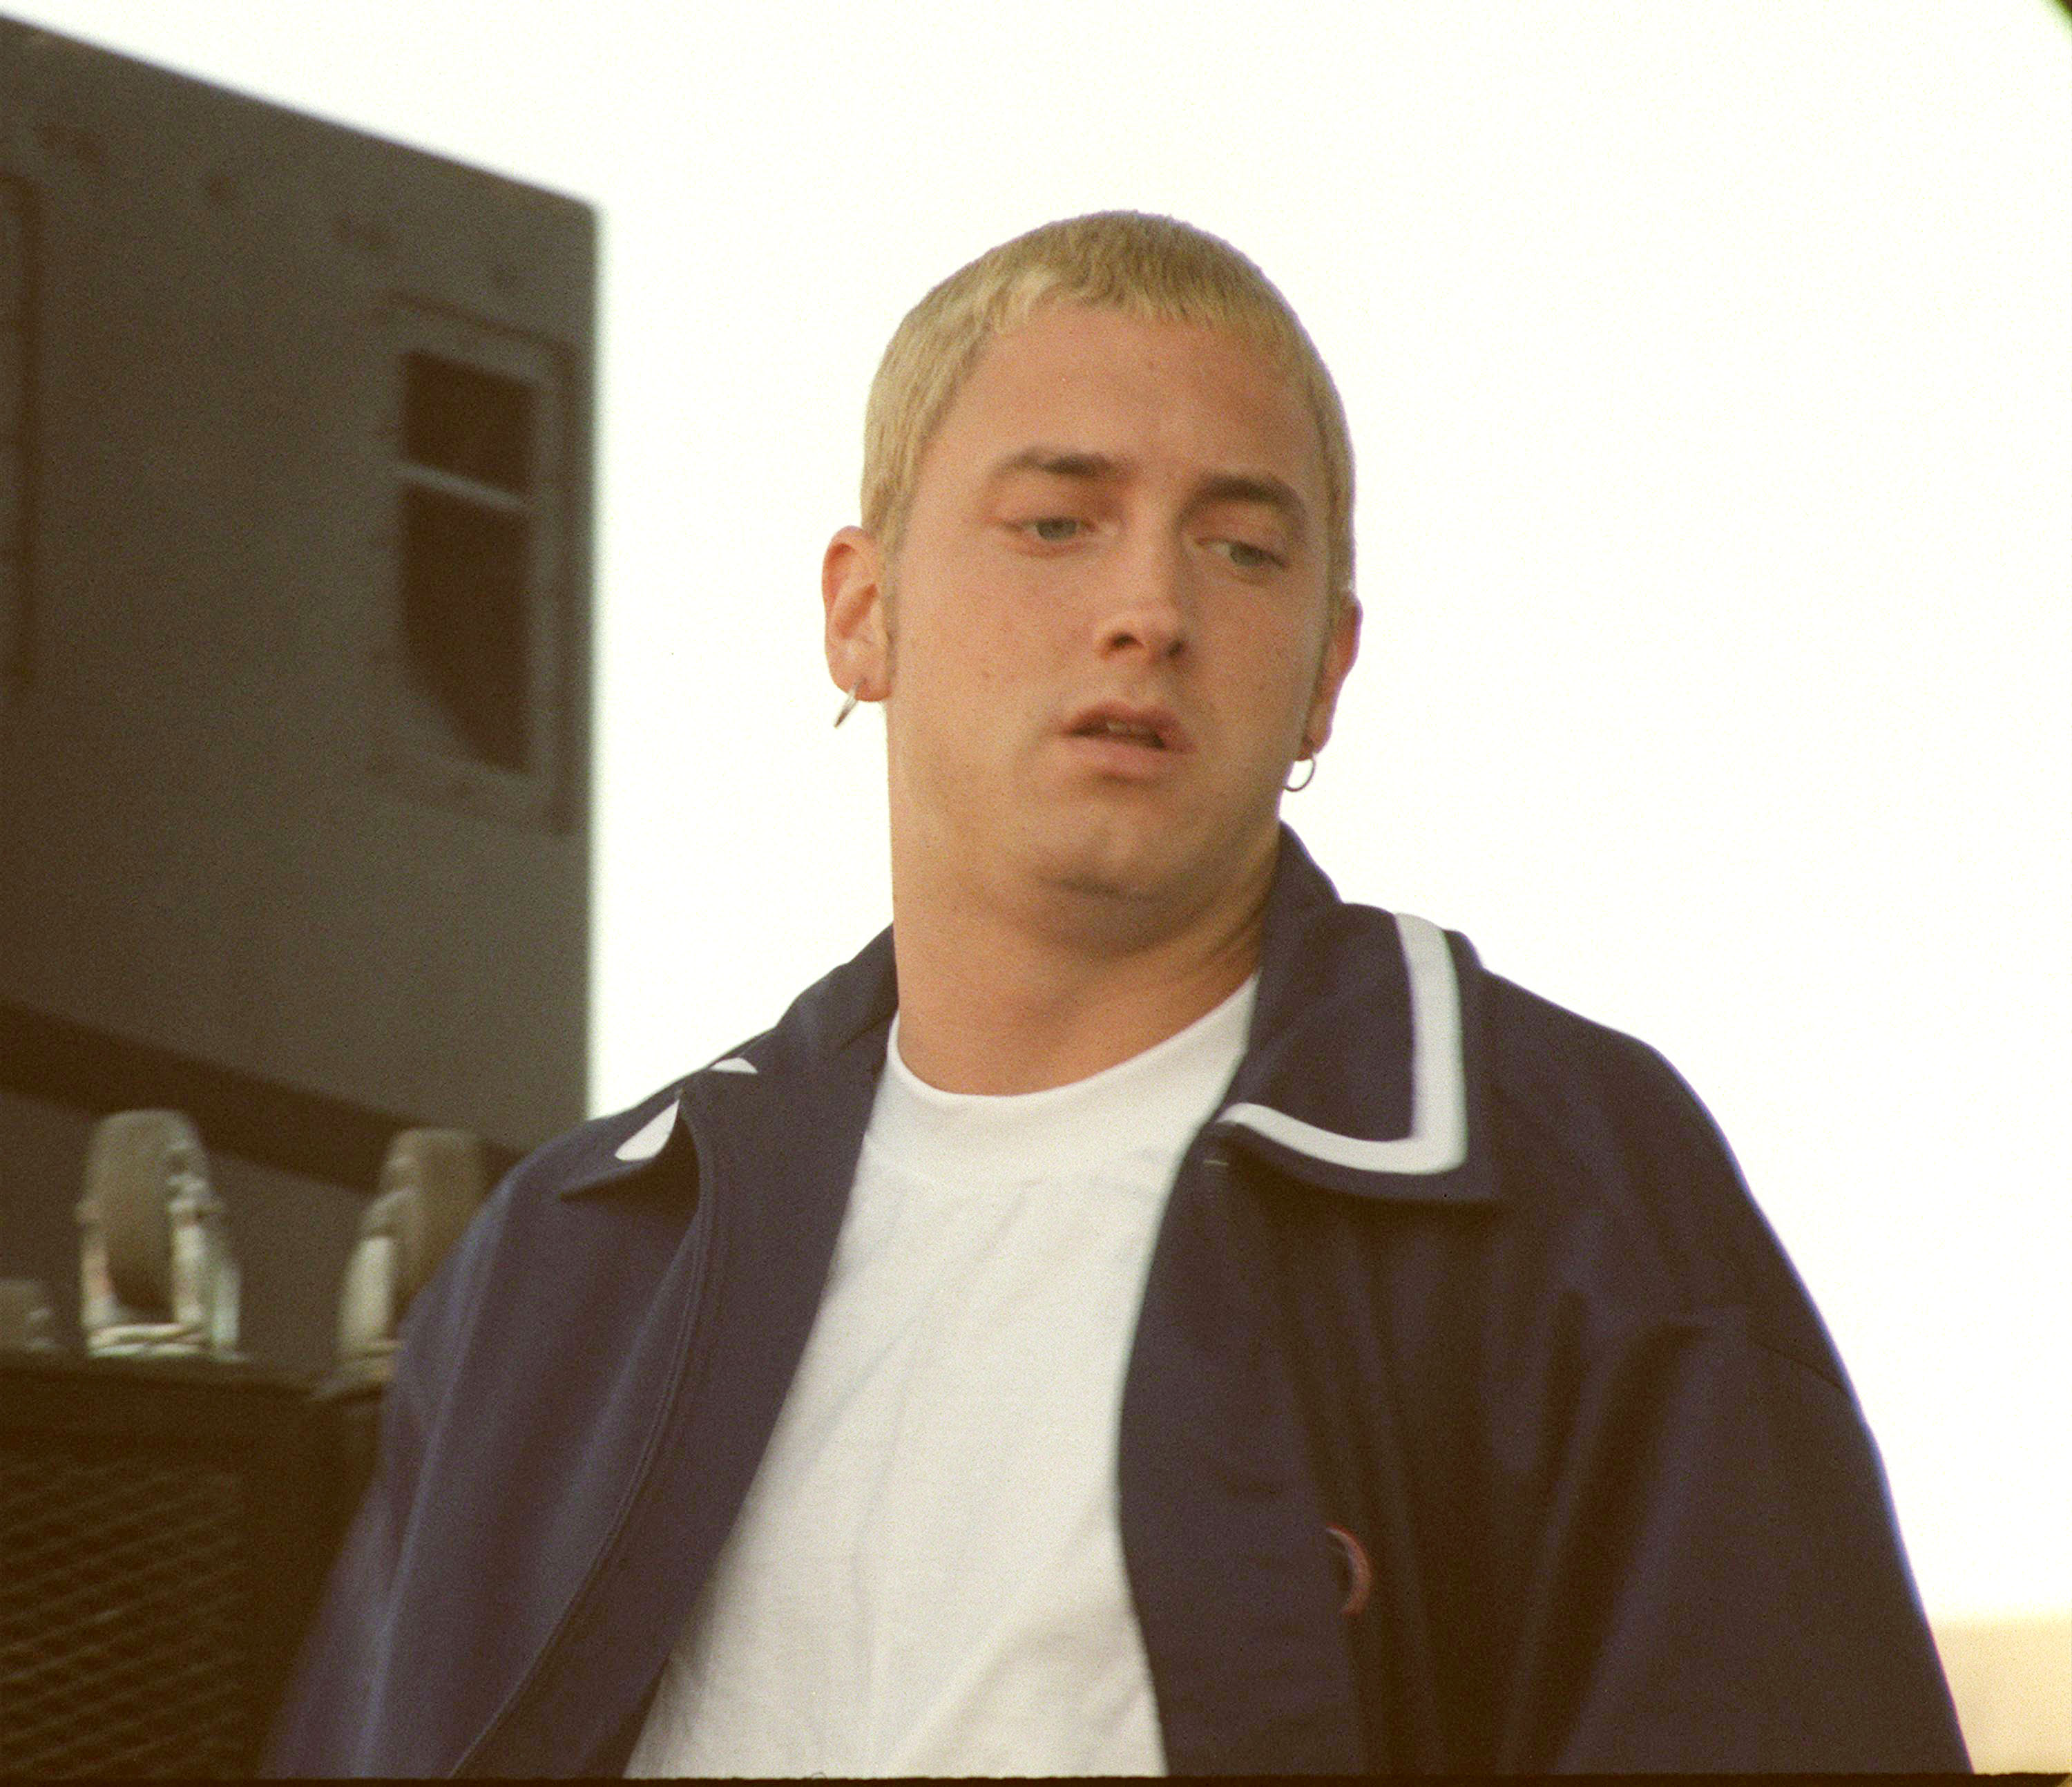 Eminem performing at a show in Oakland, California on July 3, 1999 | Source: Getty Images